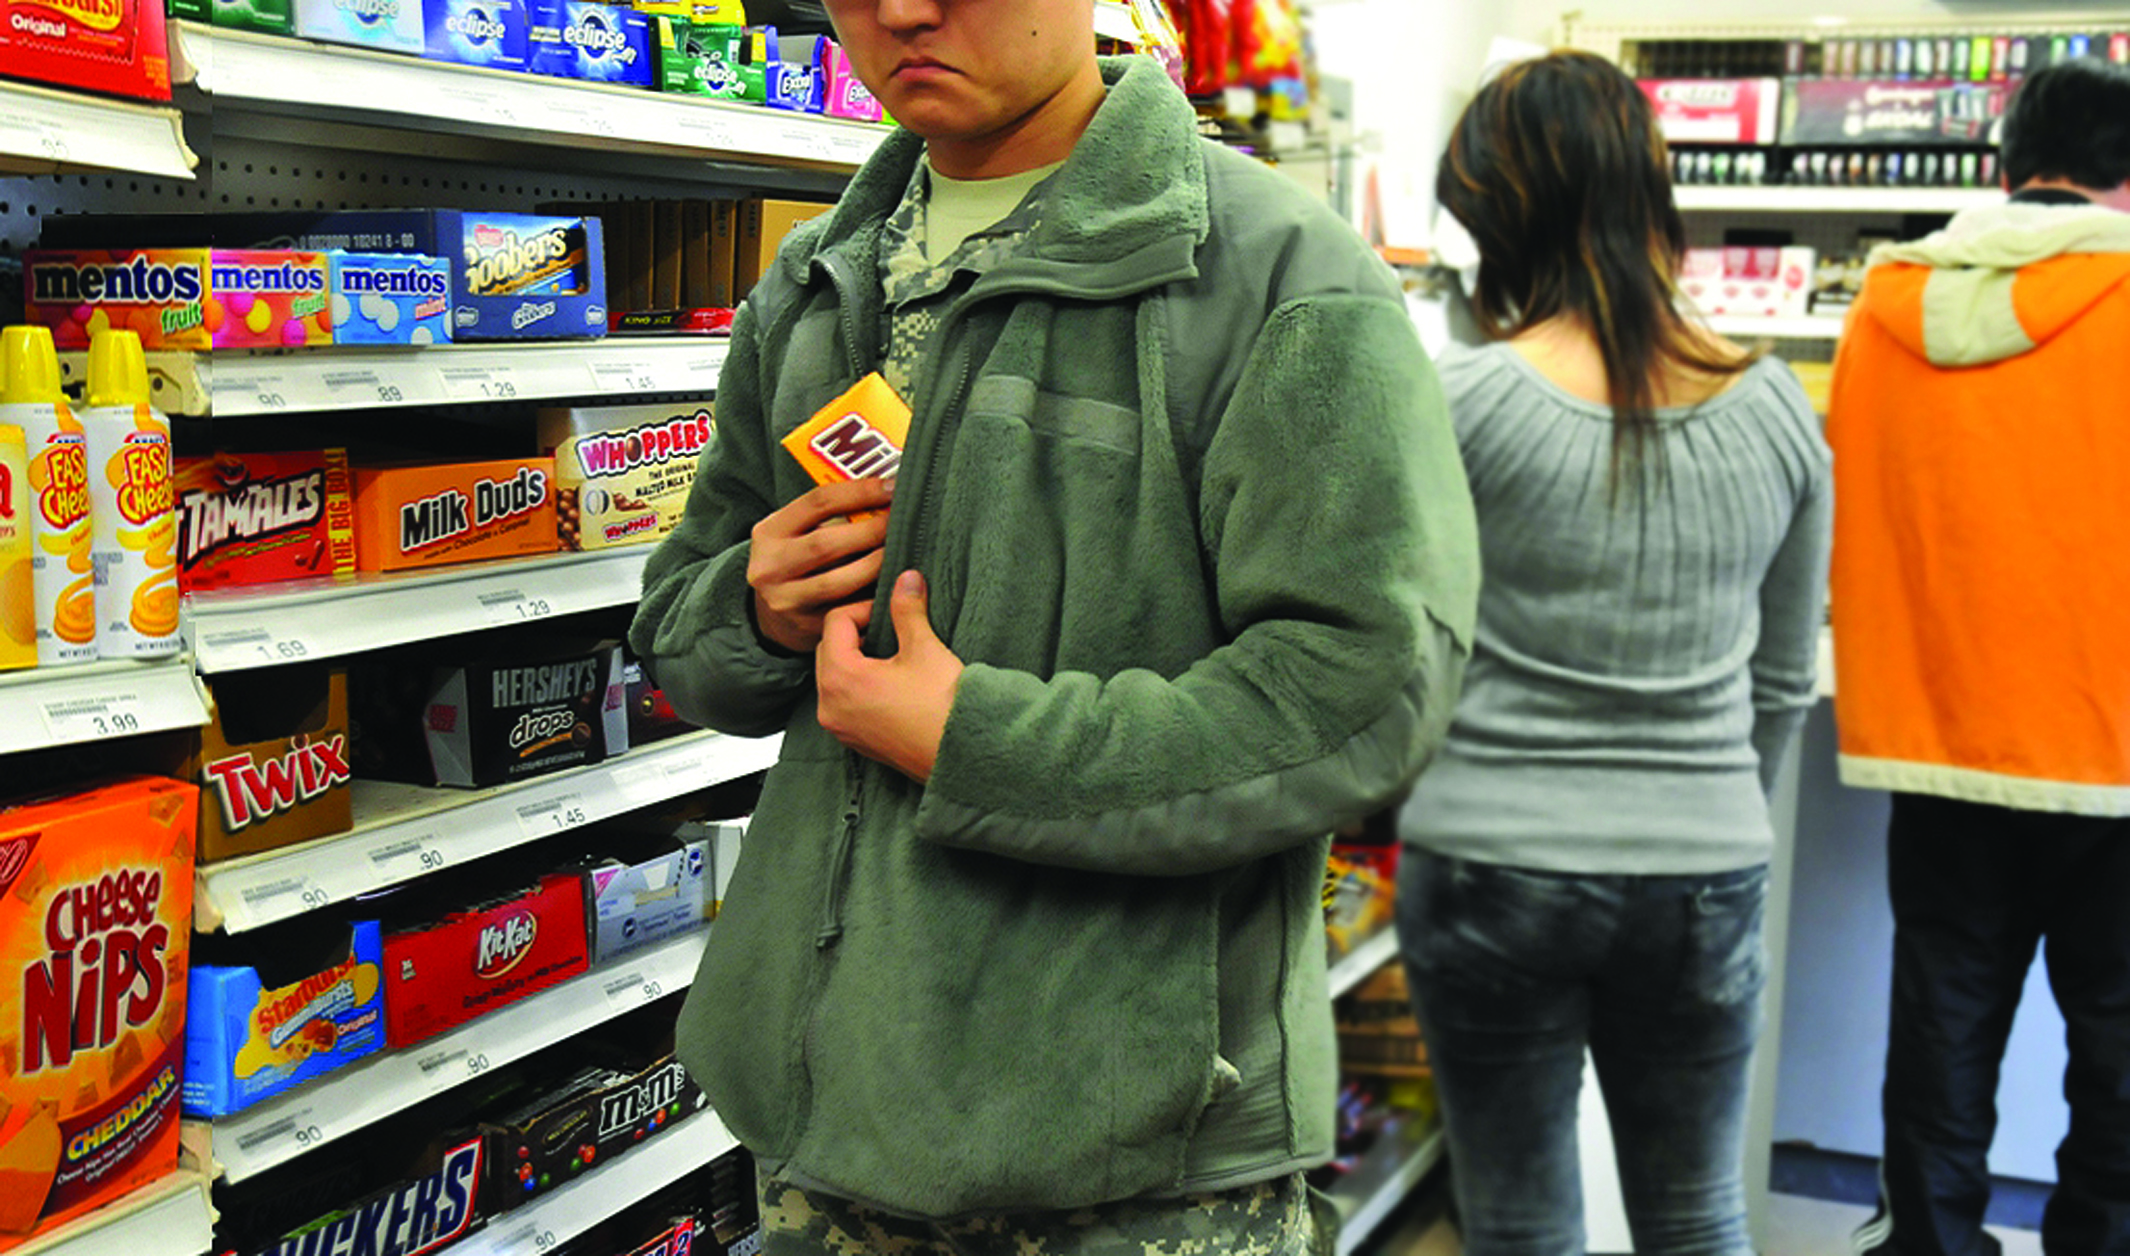 Shoplifting at Exchange costs military in many ways